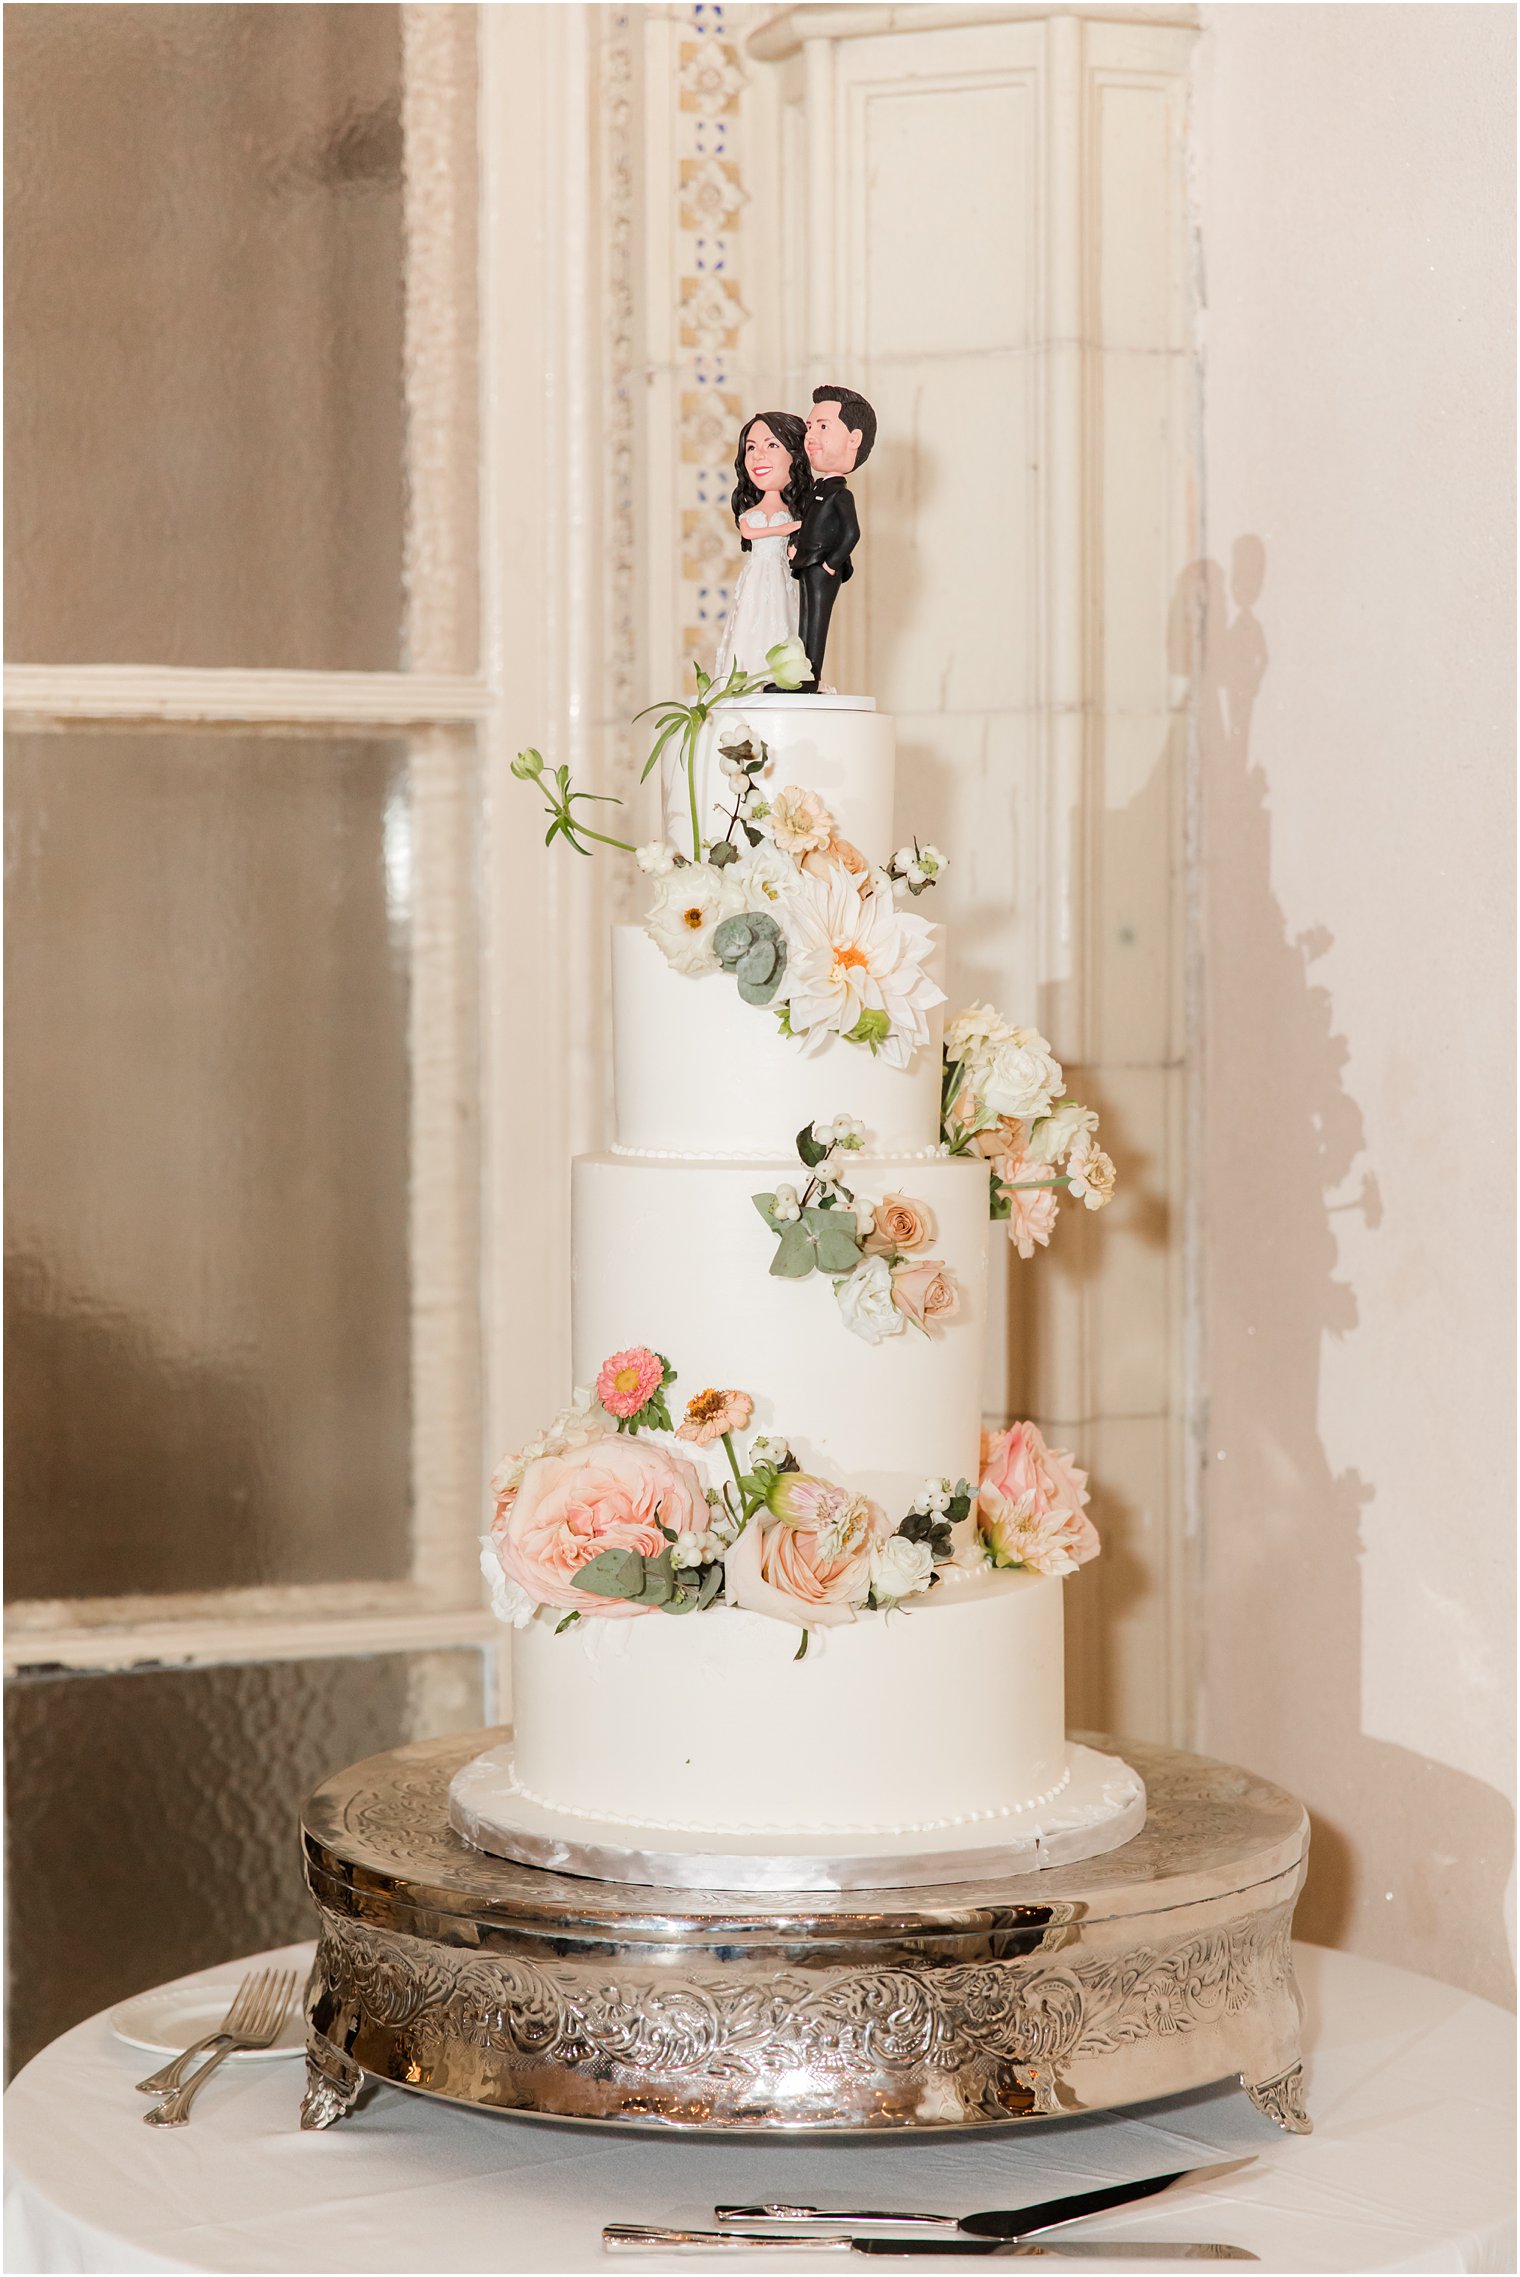 tiered wedding cake with bobble heads of bride and groom on top